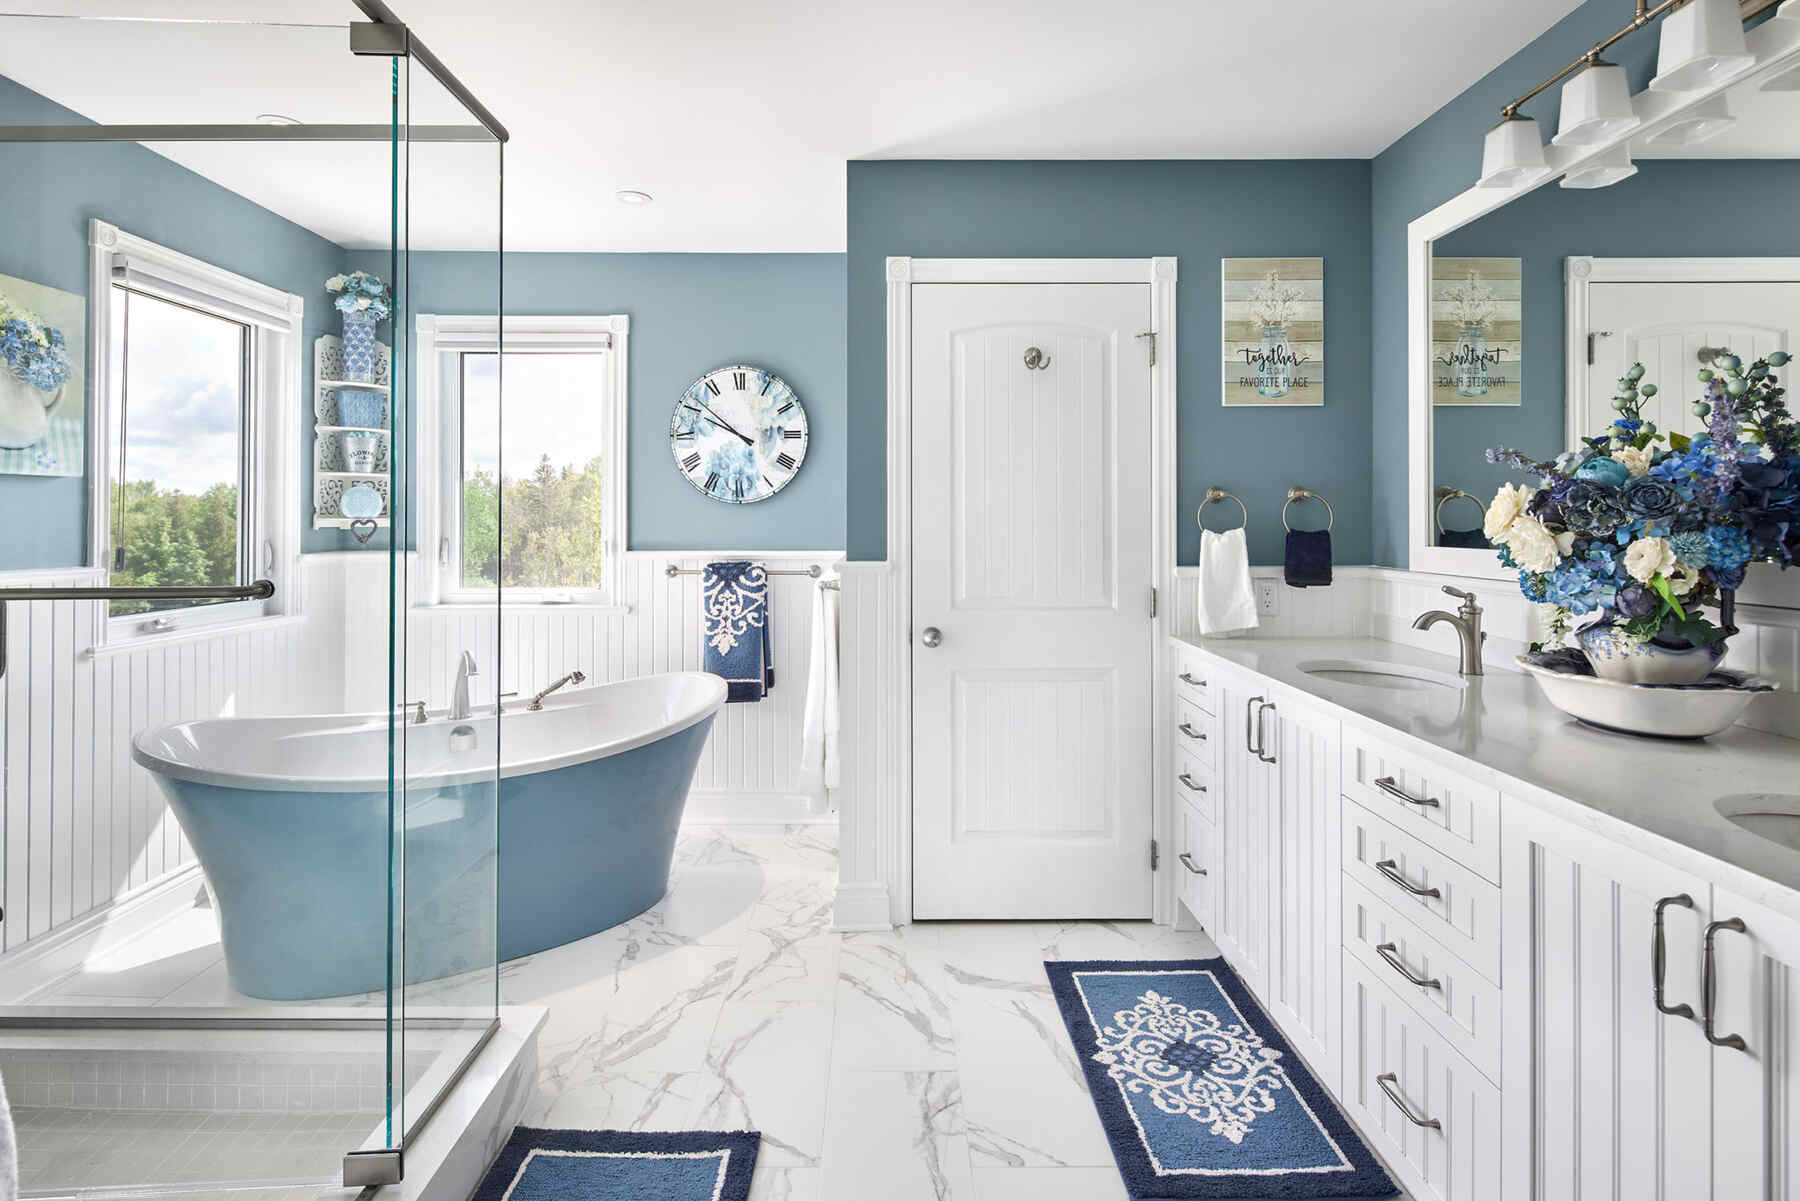 Bathroom with blue accents and clear glass shower door